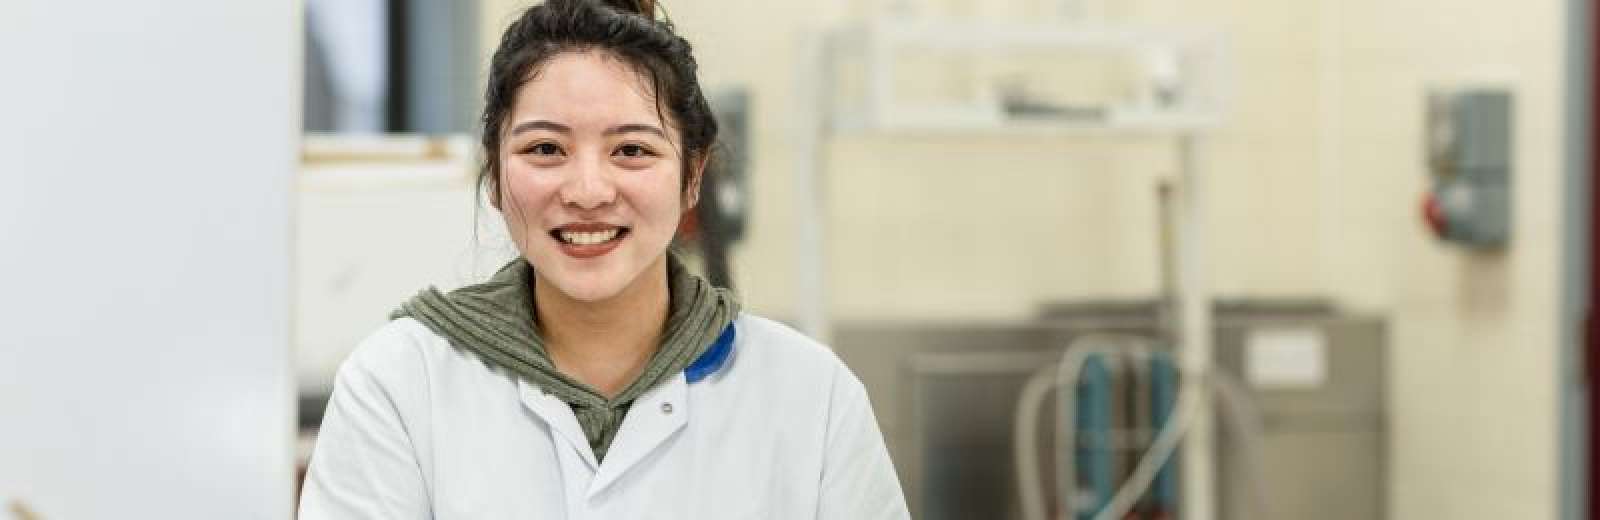 Student smiling at the camera in the Food Technology Laboratory